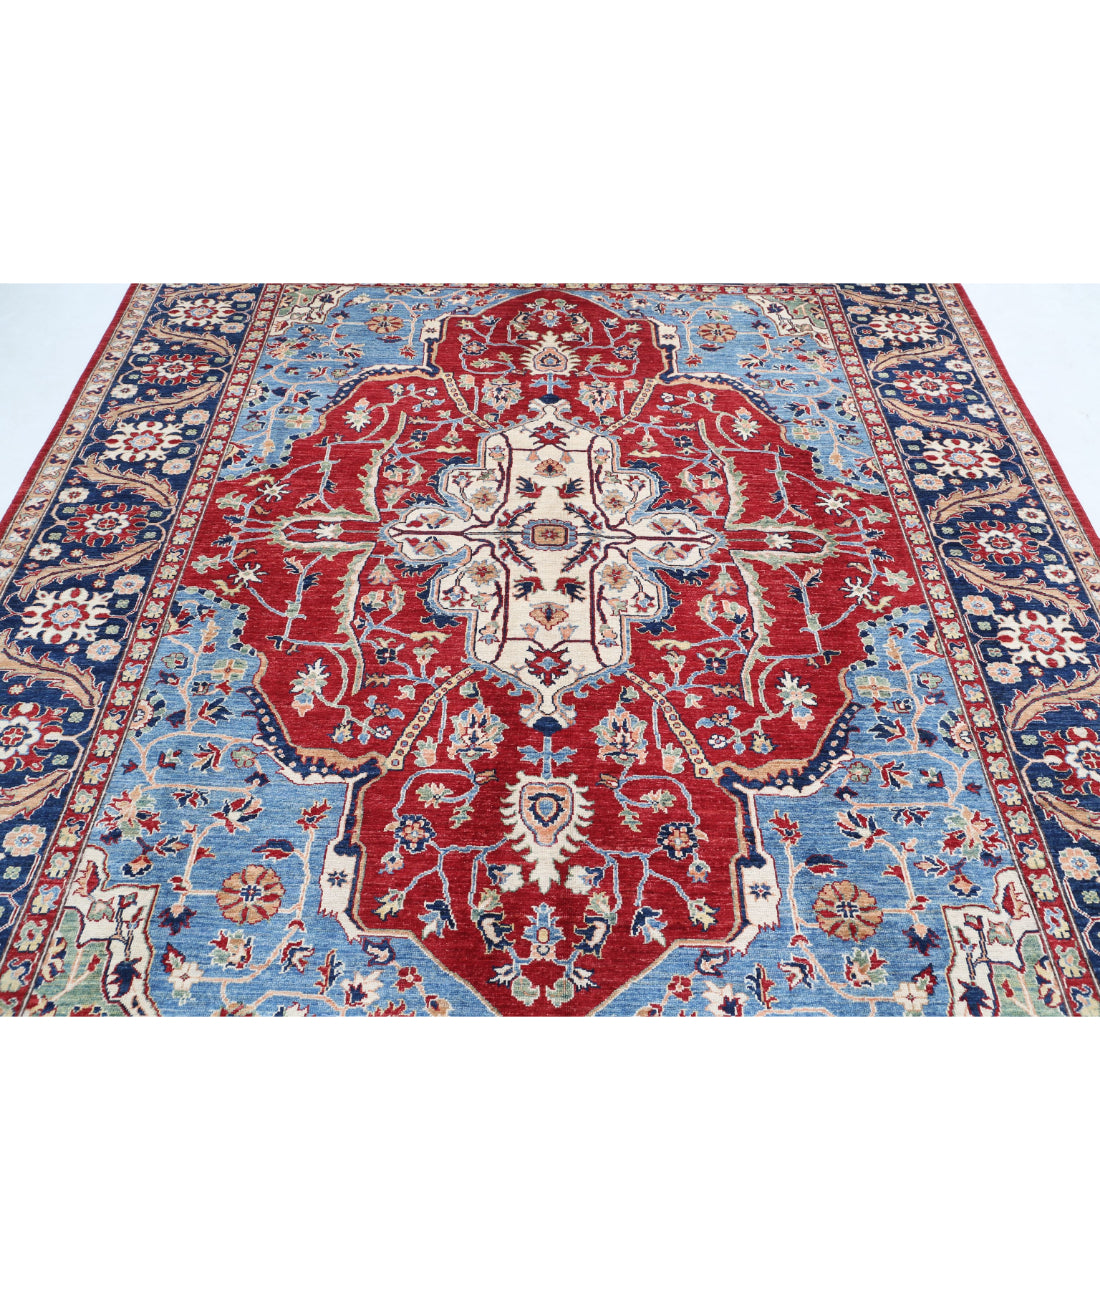 Heriz 8'0'' X 8'10'' Hand-Knotted Wool Rug 8'0'' x 8'10'' (240 X 265) / Red / Blue